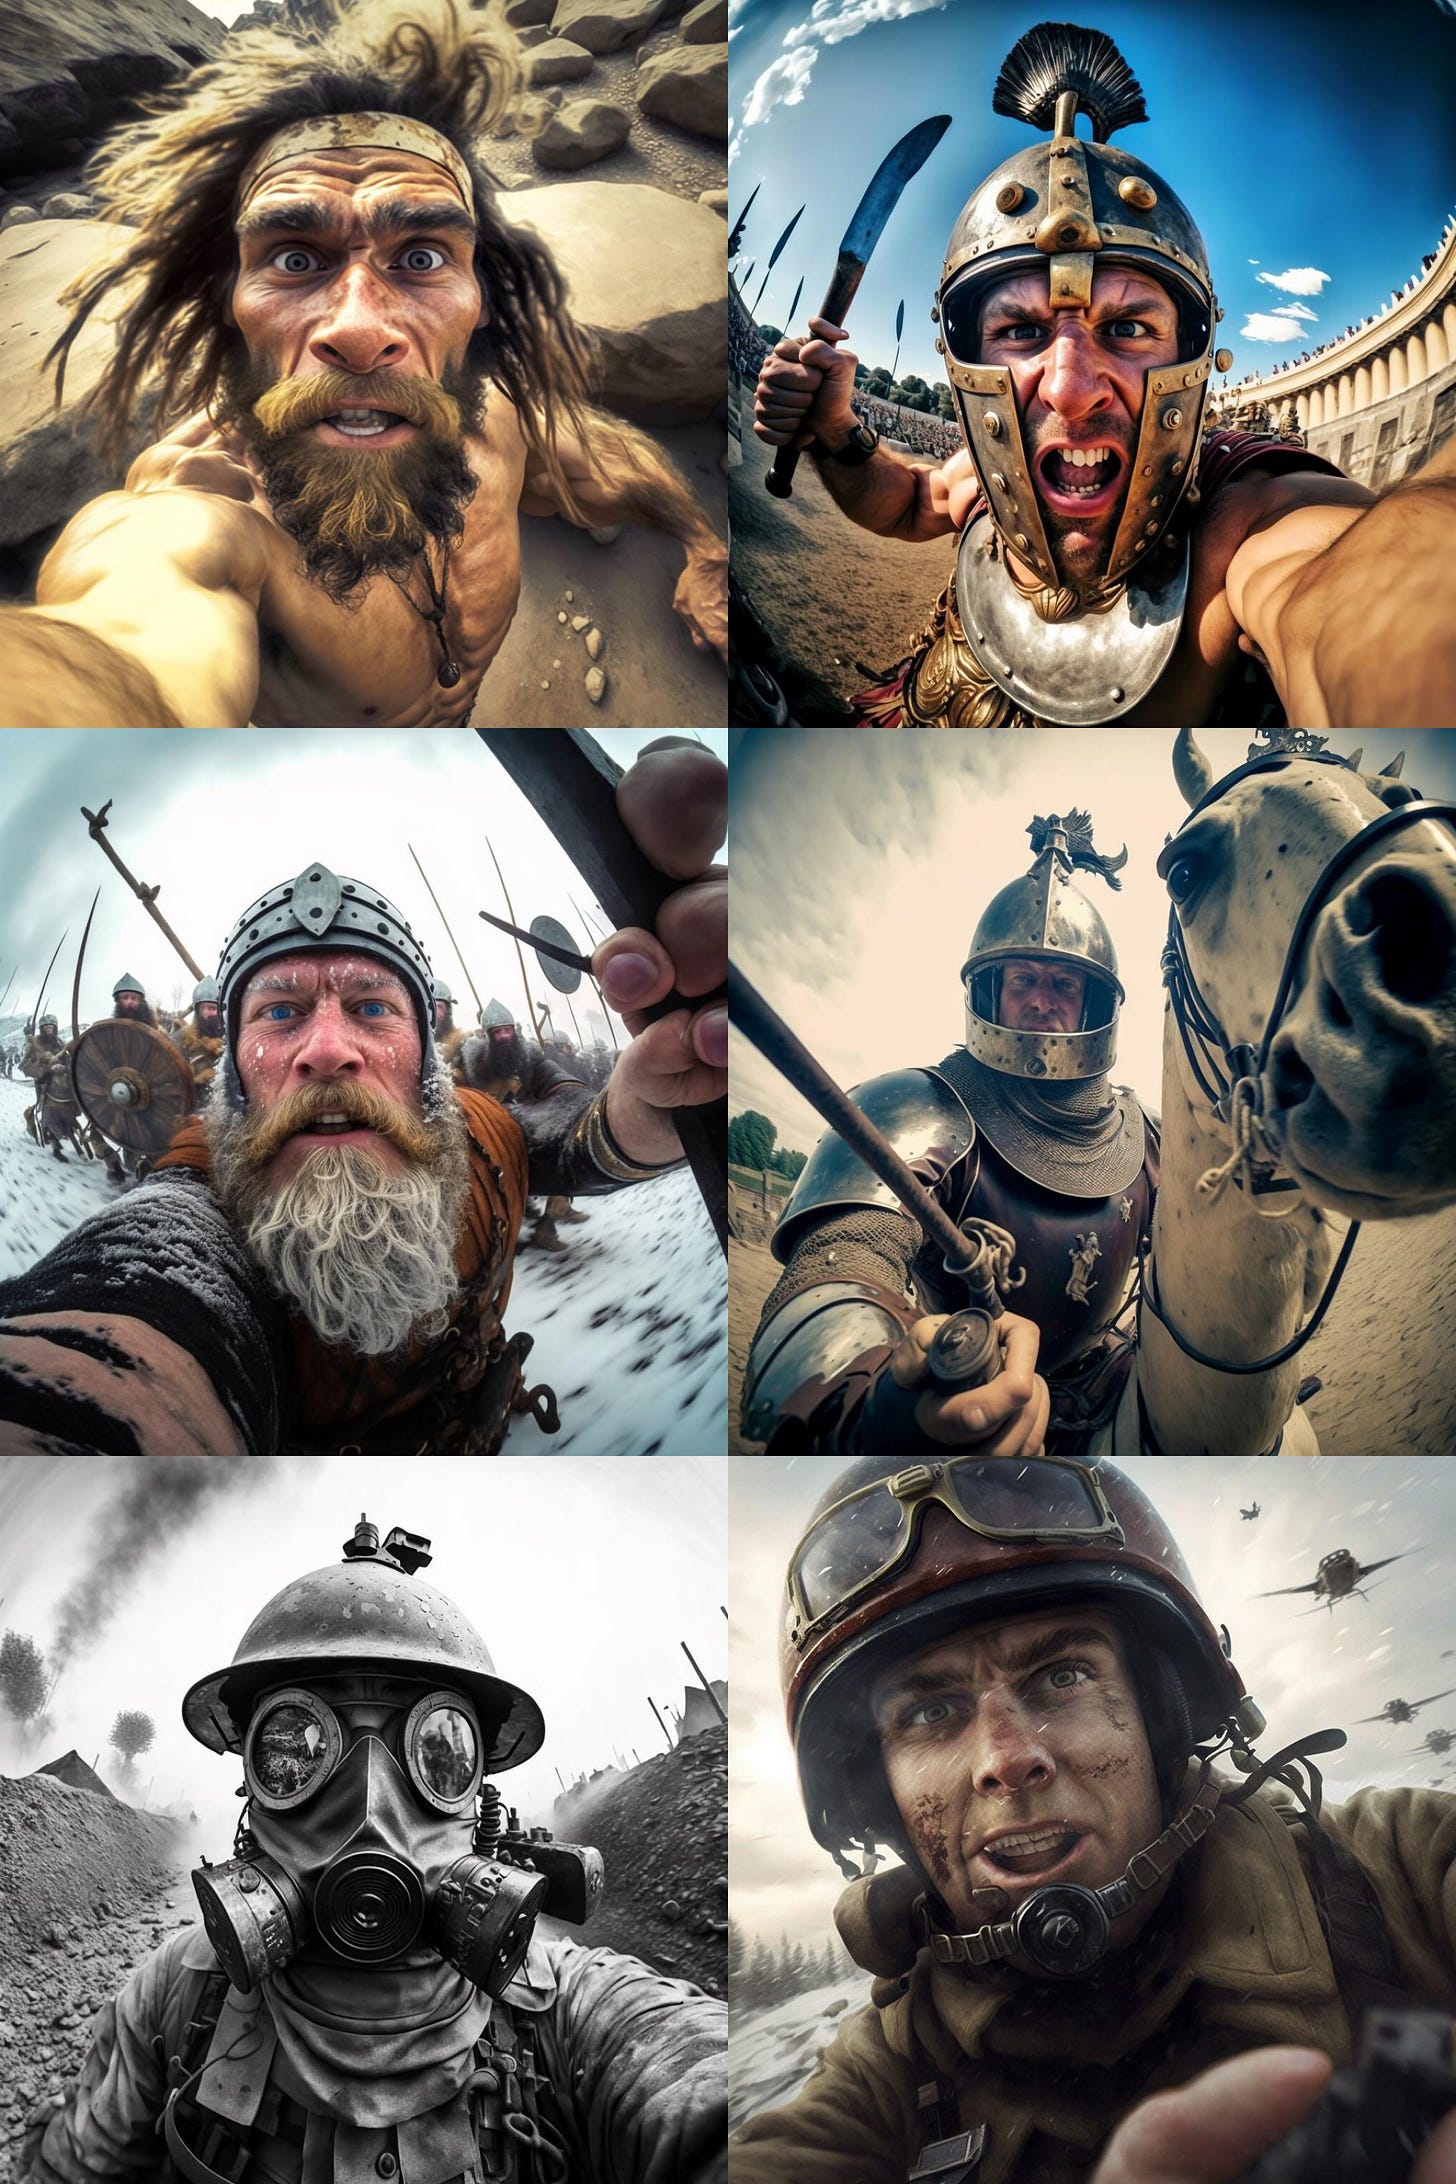 Inspired by the previous post, here are some GoPro selfies from the past  5000 years of battles : r/midjourney